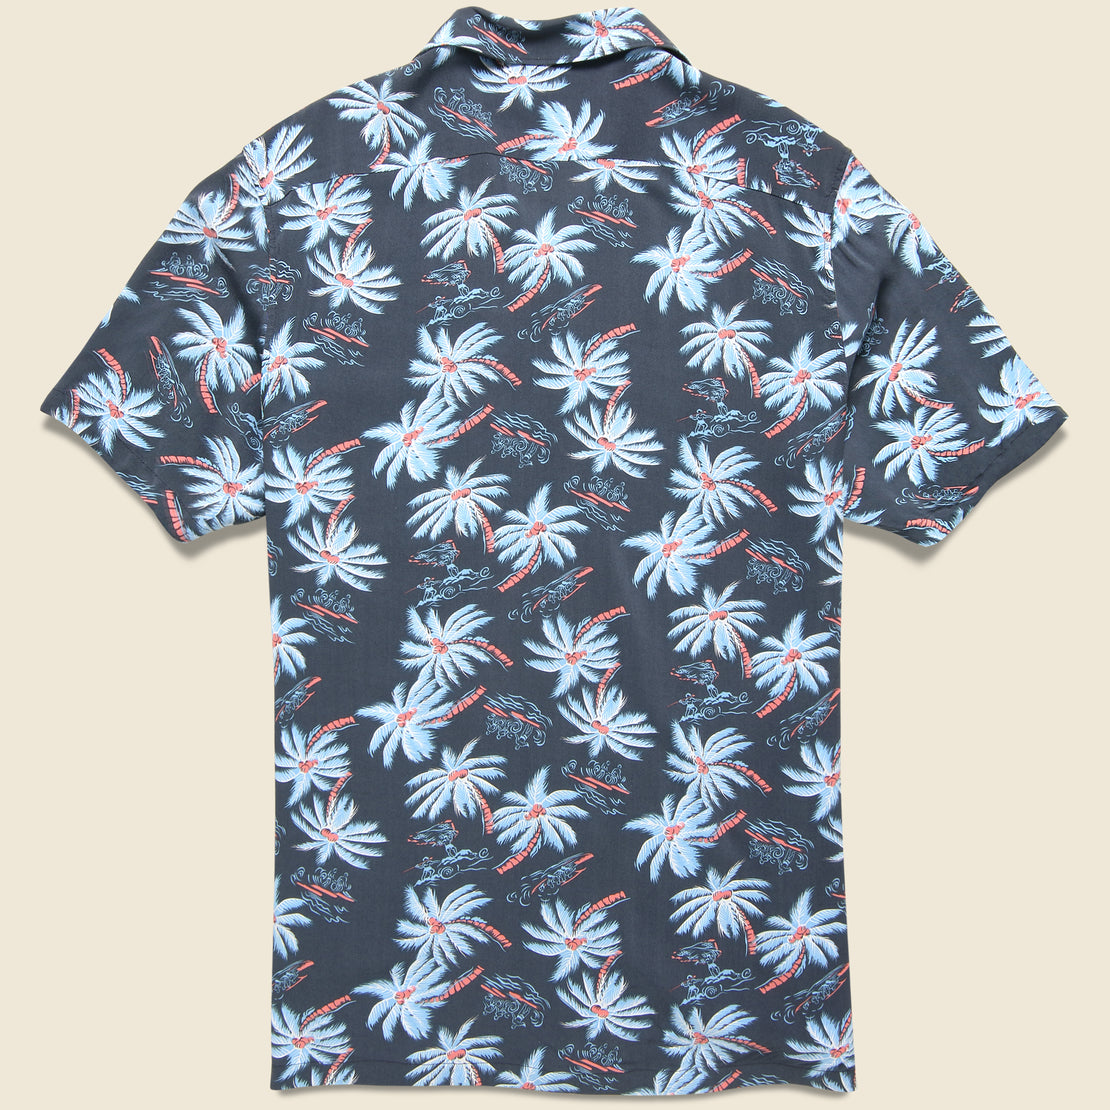 Kona Camp Shirt - Midnight Palm Hawaiian - Faherty - STAG Provisions - Tops - S/S Woven - Floral